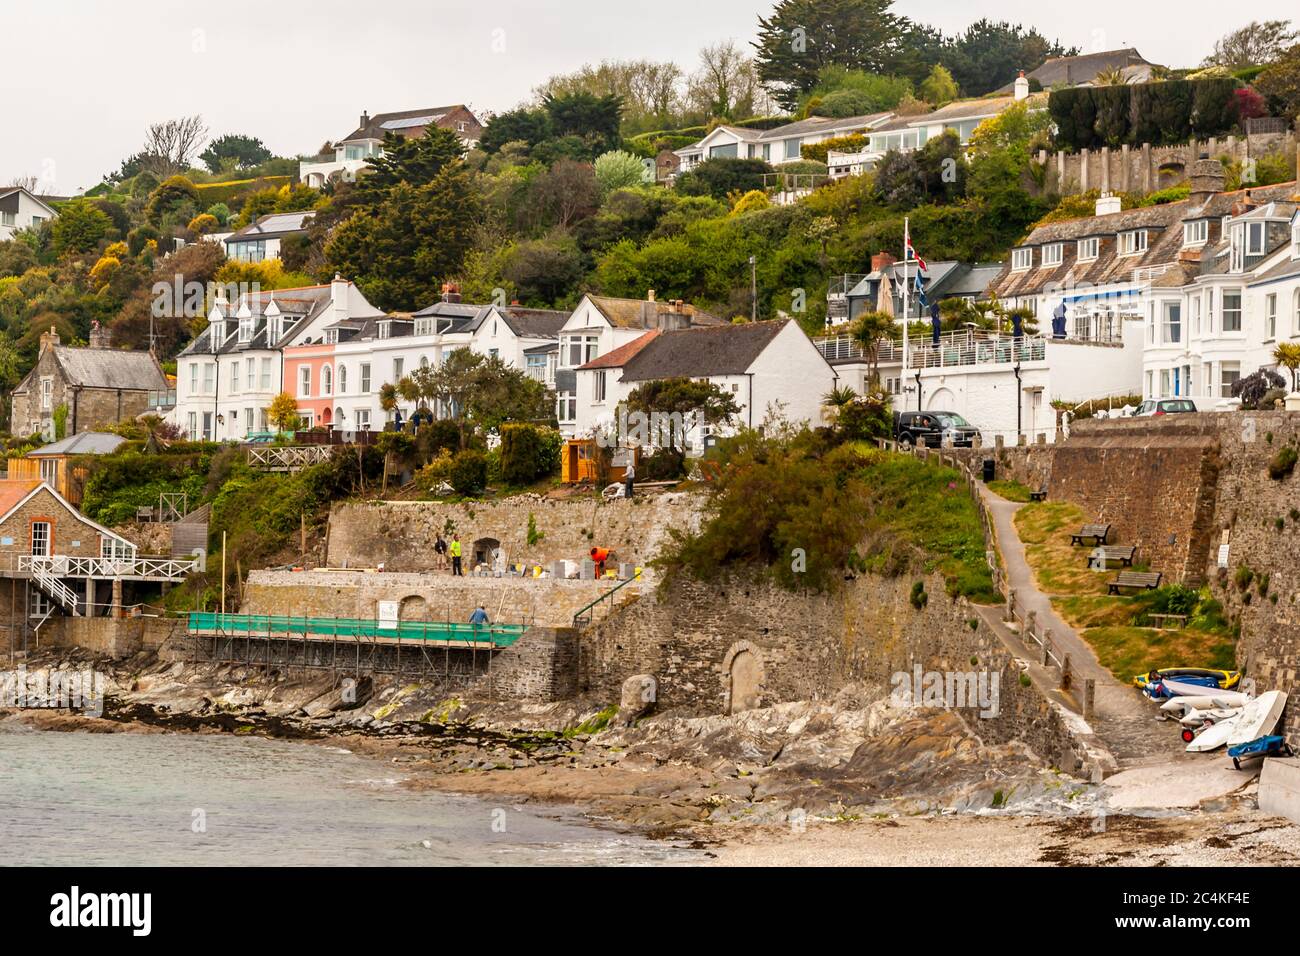 Tresanton Hotel with the buildings built into the hillside and the new Beach Club under construction in St. Mawes, England, UK Stock Photo